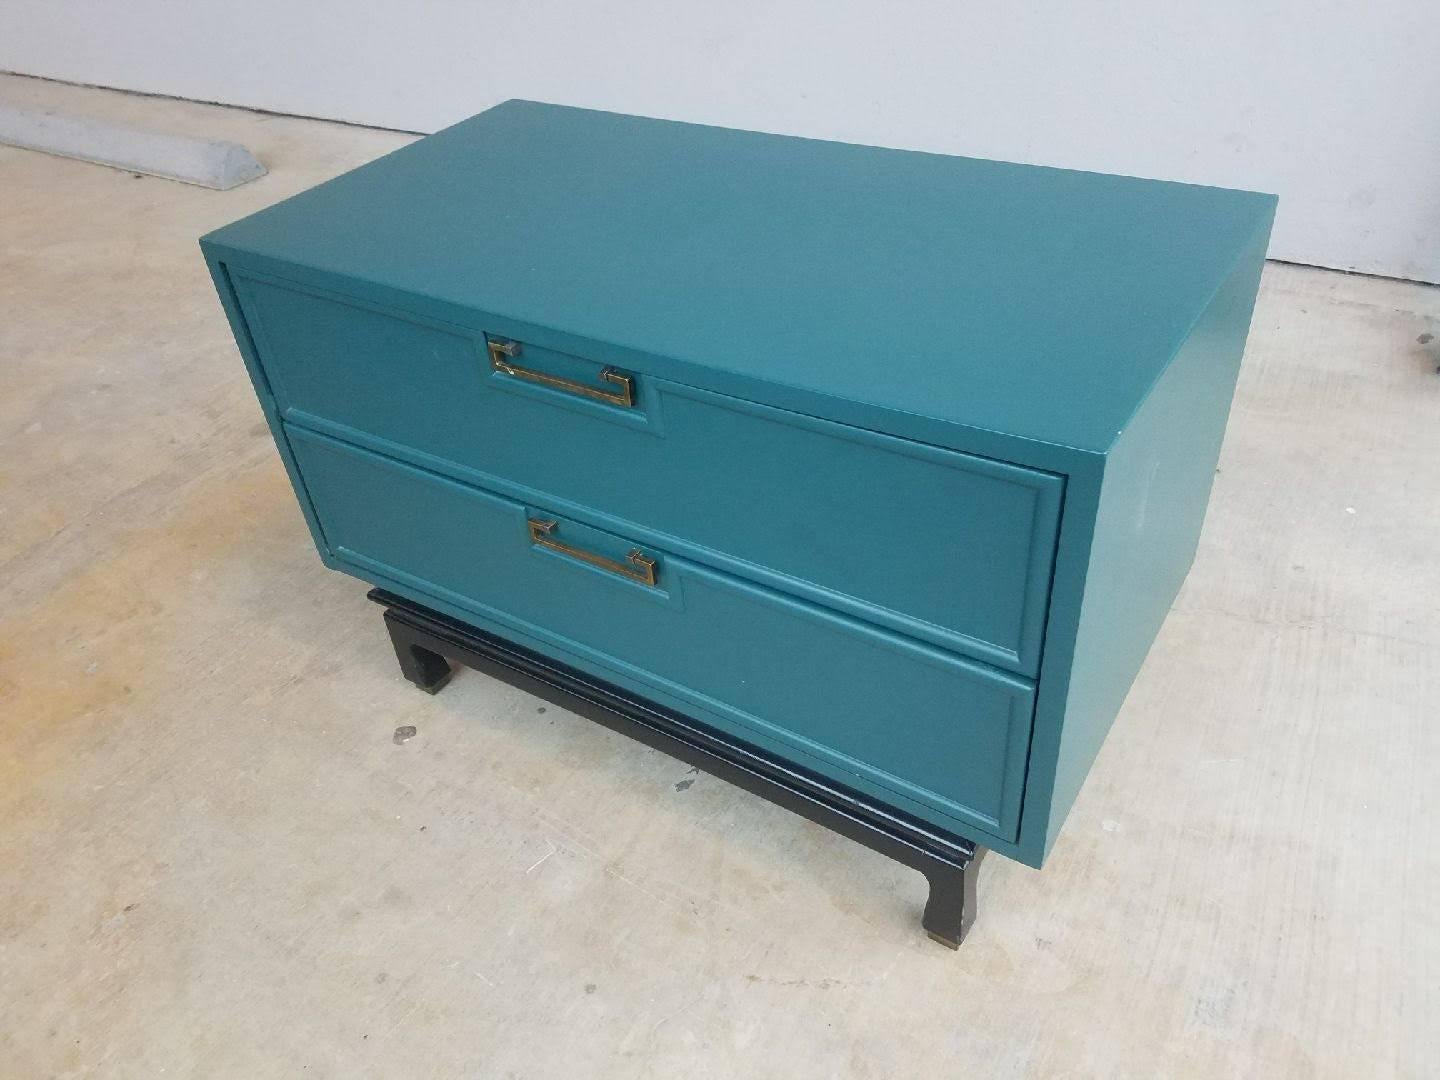 Lovely pair Mid-Century Modern two-drawer nightstands lacquered in peacock blue over walnut, showcase the clean lines attributed to American of Martinsville quality furniture designs. Sometimes labelled as Danish Modern this piece with an Asian